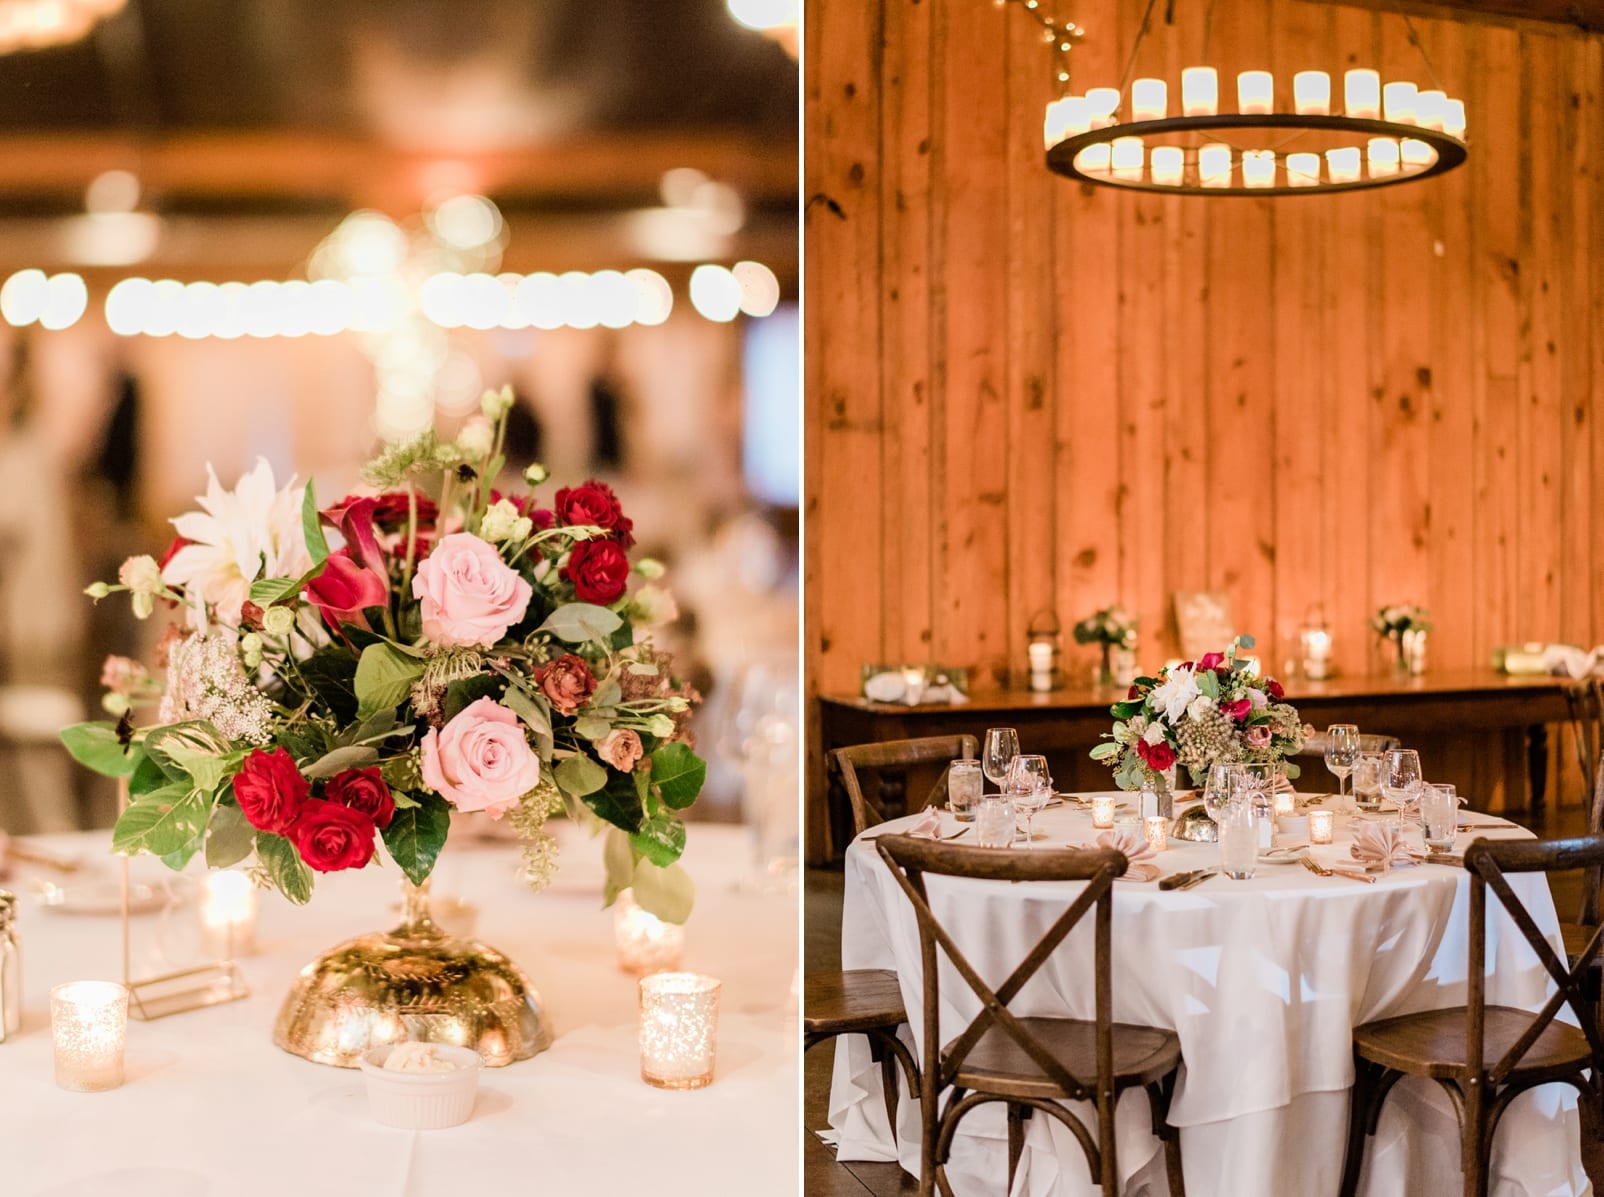 Angus Barn indoor wedding reception with floral table centerpiece and wooden chairs around a circular table under a circular wooden candle chandelier photo